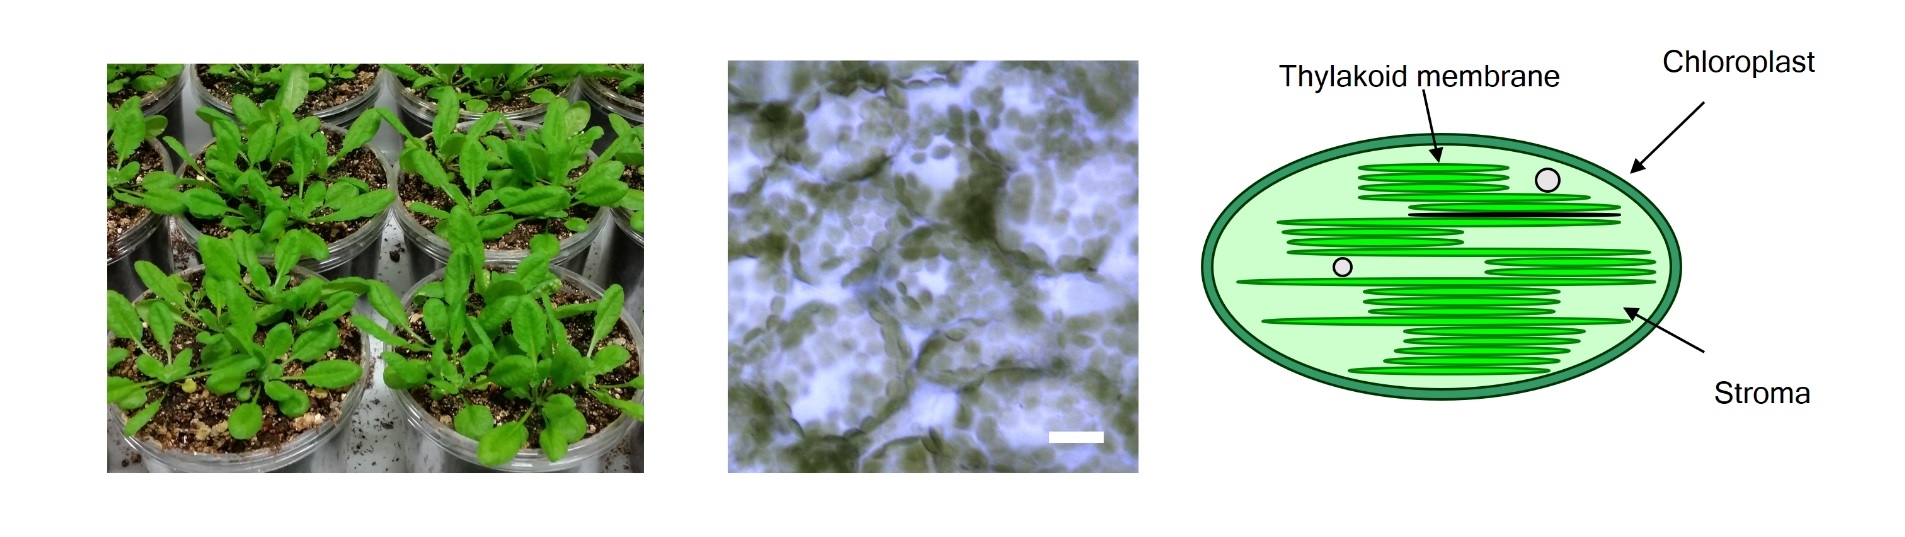 Figure 1. Epidermal cells of Arabidopsis leaves and schematic of chloroplasts